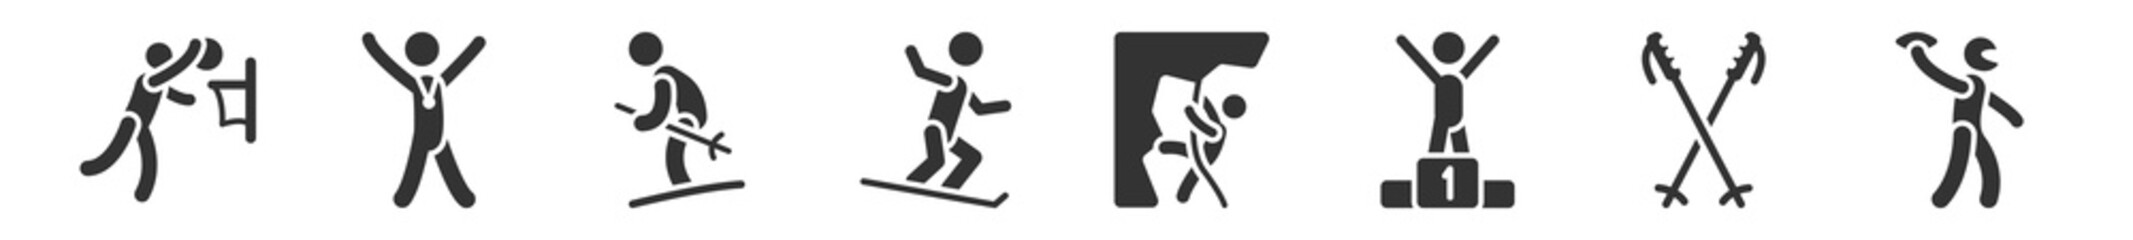 filled set of sports icons. glyph vector icons such as basketball player scoring, champion, skiing, stick figure on snowboard, climber, american football player playing throwing the ball in his